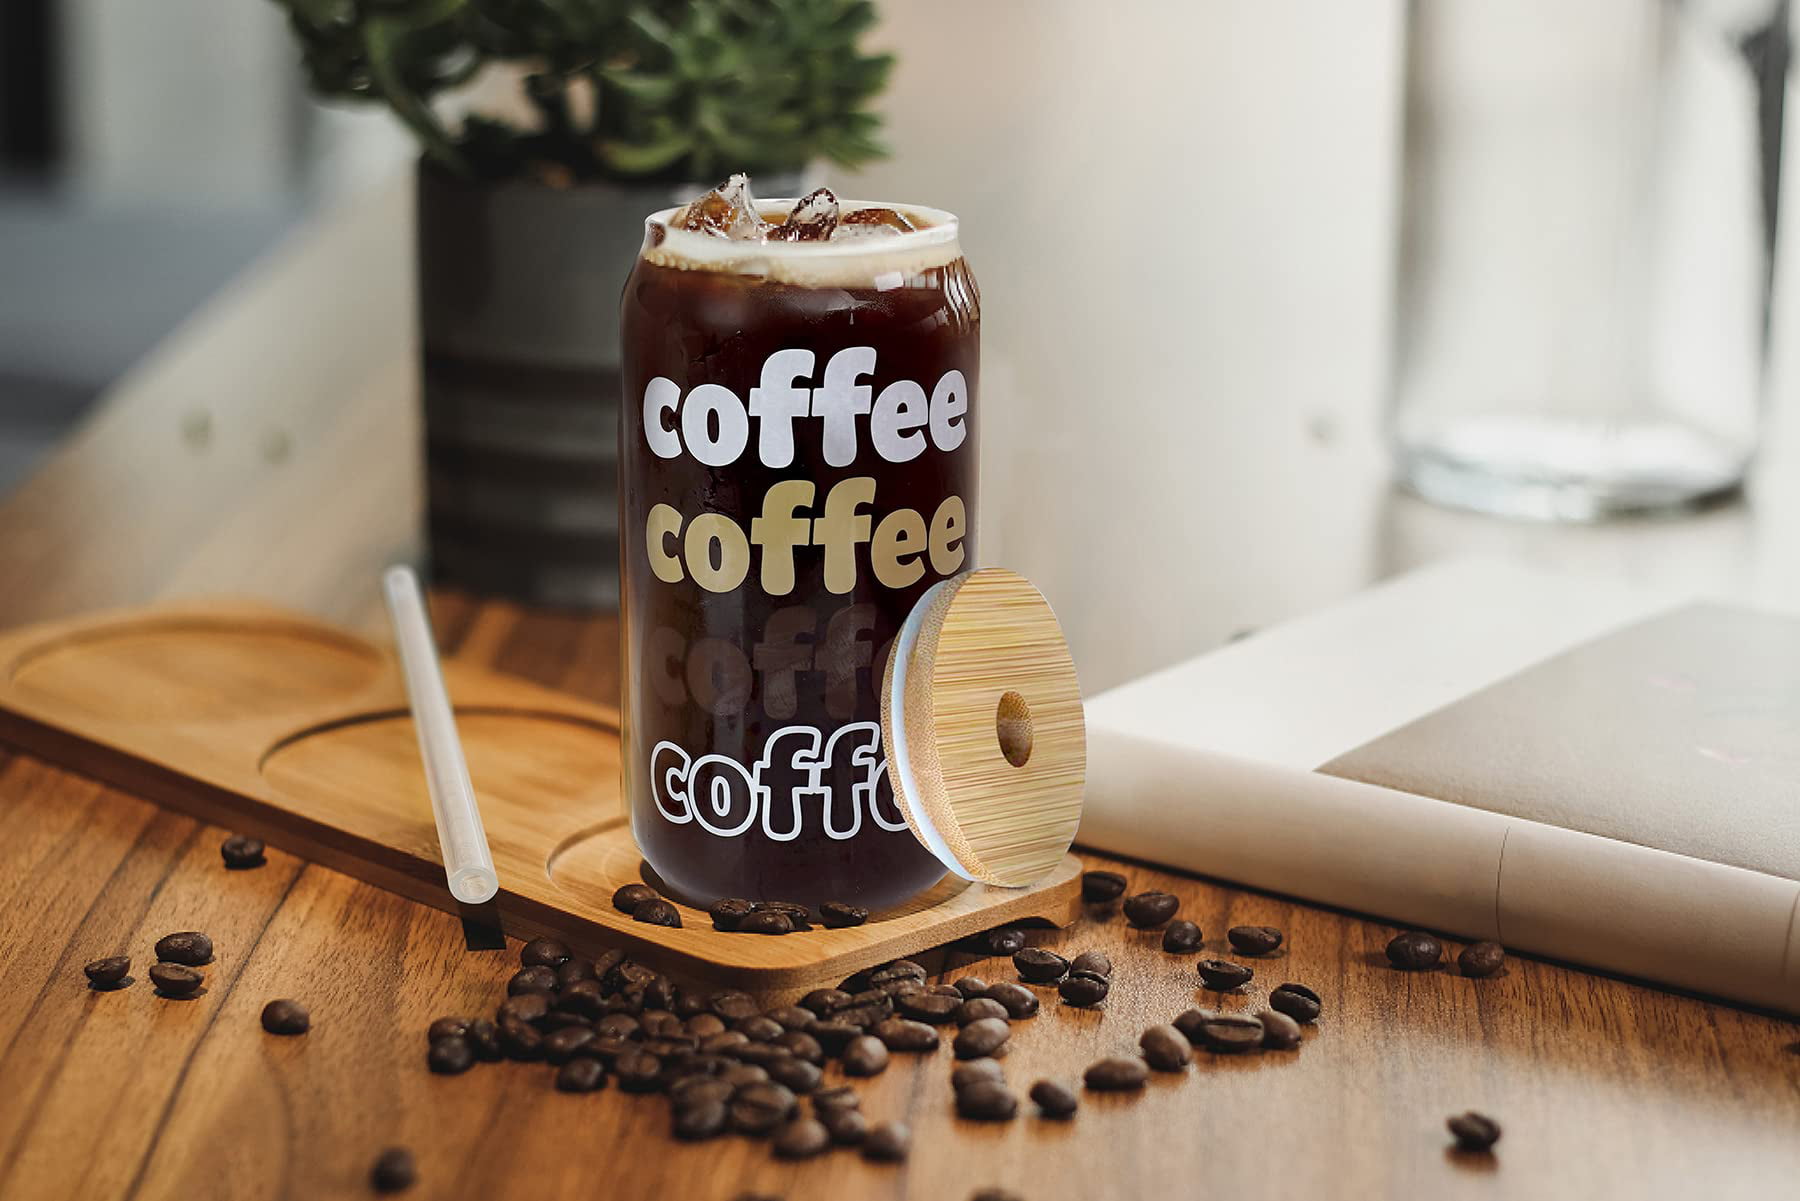 Beer Can Glass – Rob Beans Coffee